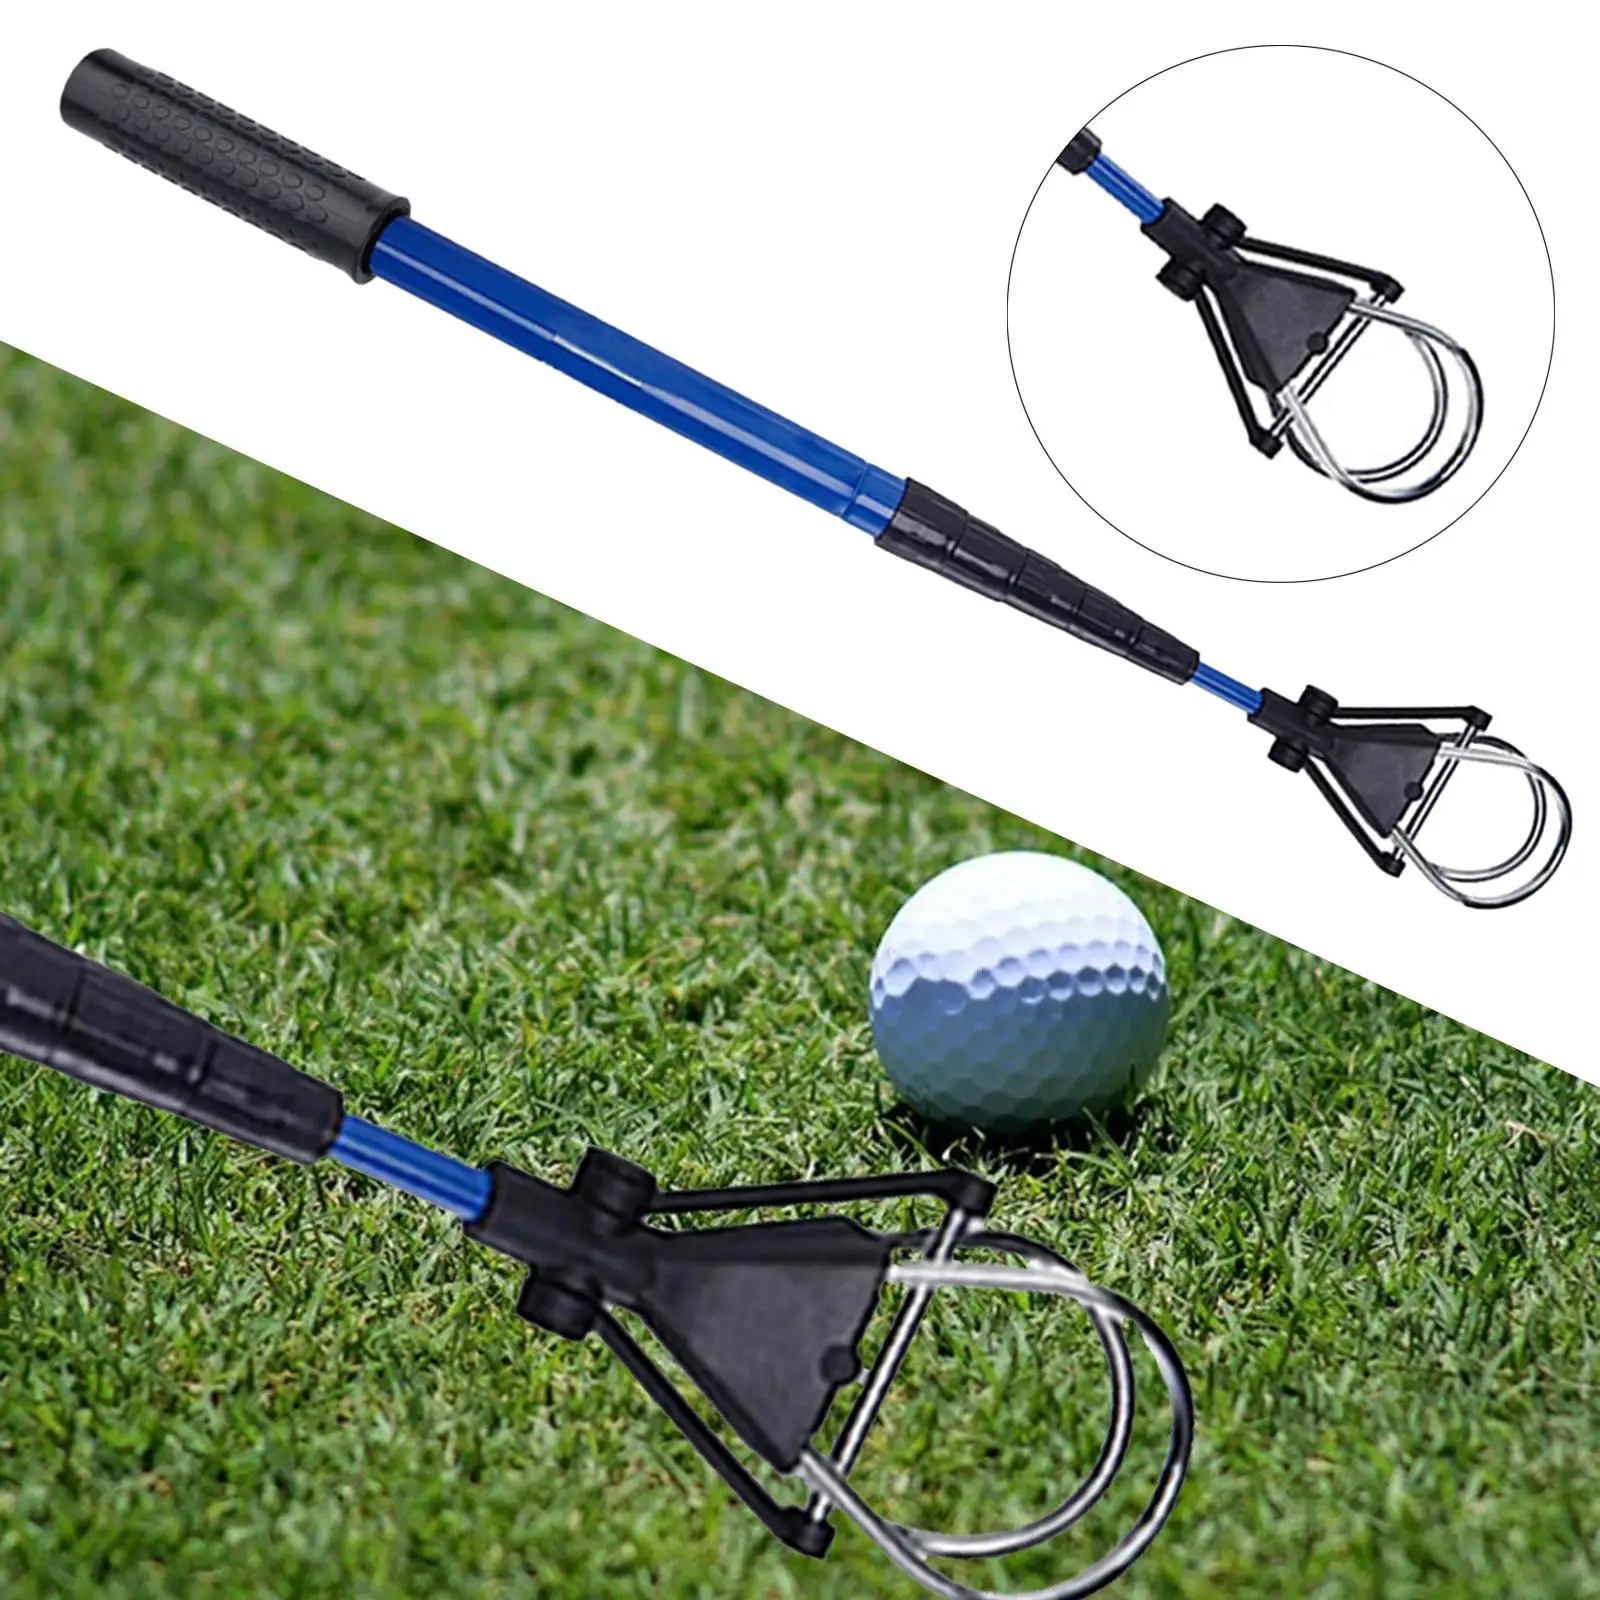 Portable Golf Ball Retriever Locking Shaft Practical Accessories Retractable Saver for Water Golfer Men Pick up Gift